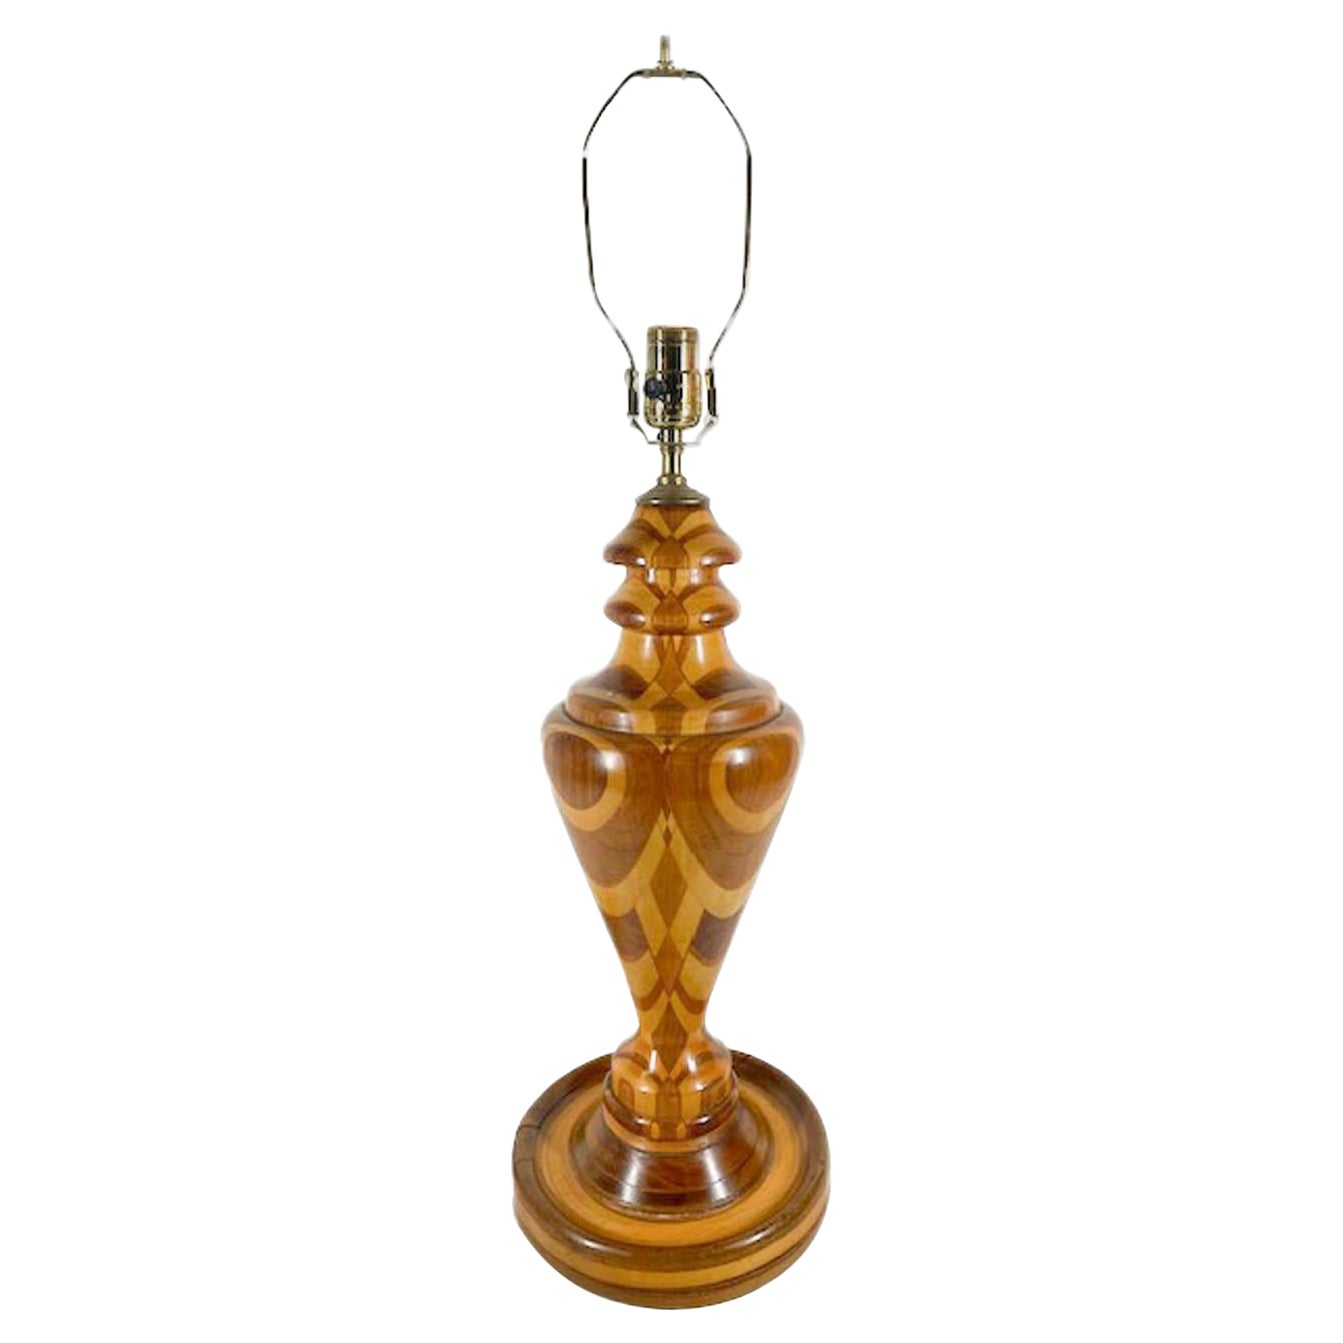 Vintage Turned Wood Lamp Made of Mahogany, Maple and Walnut For Sale